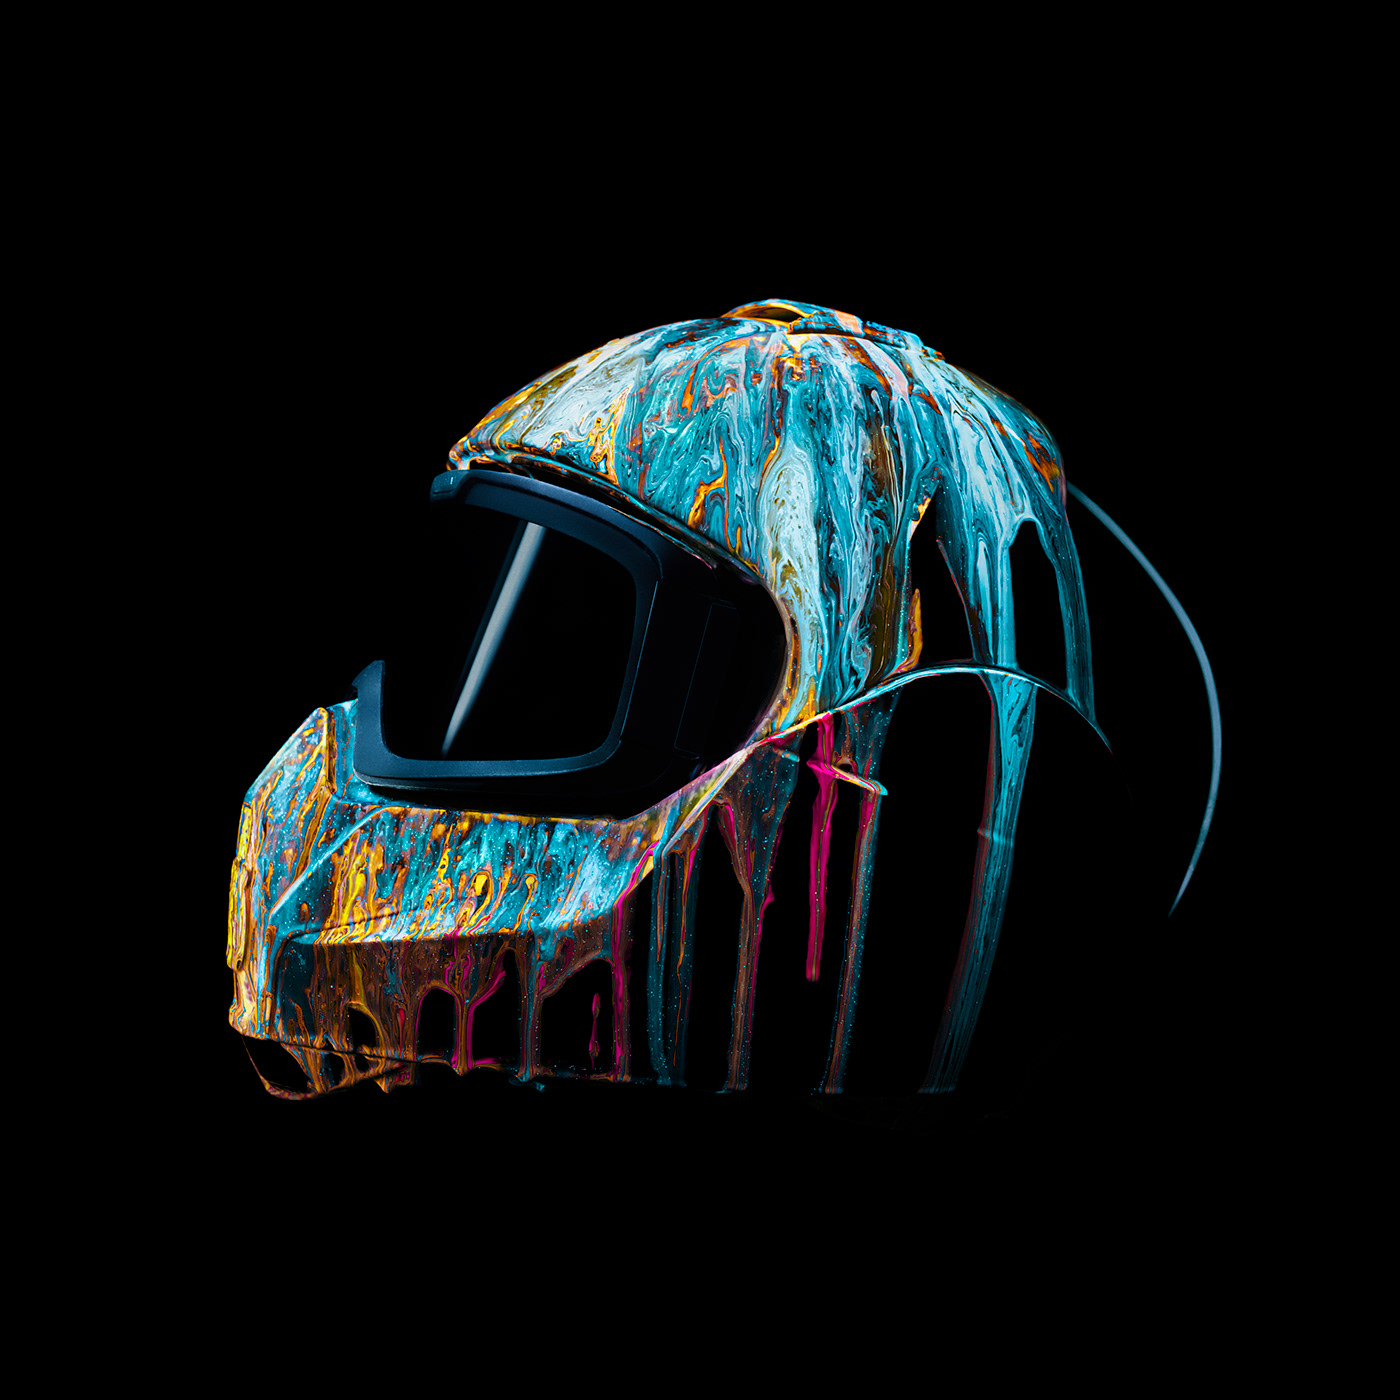 To create Halo, Rubén used a real helmet, painted it and then photographed it in the studio.